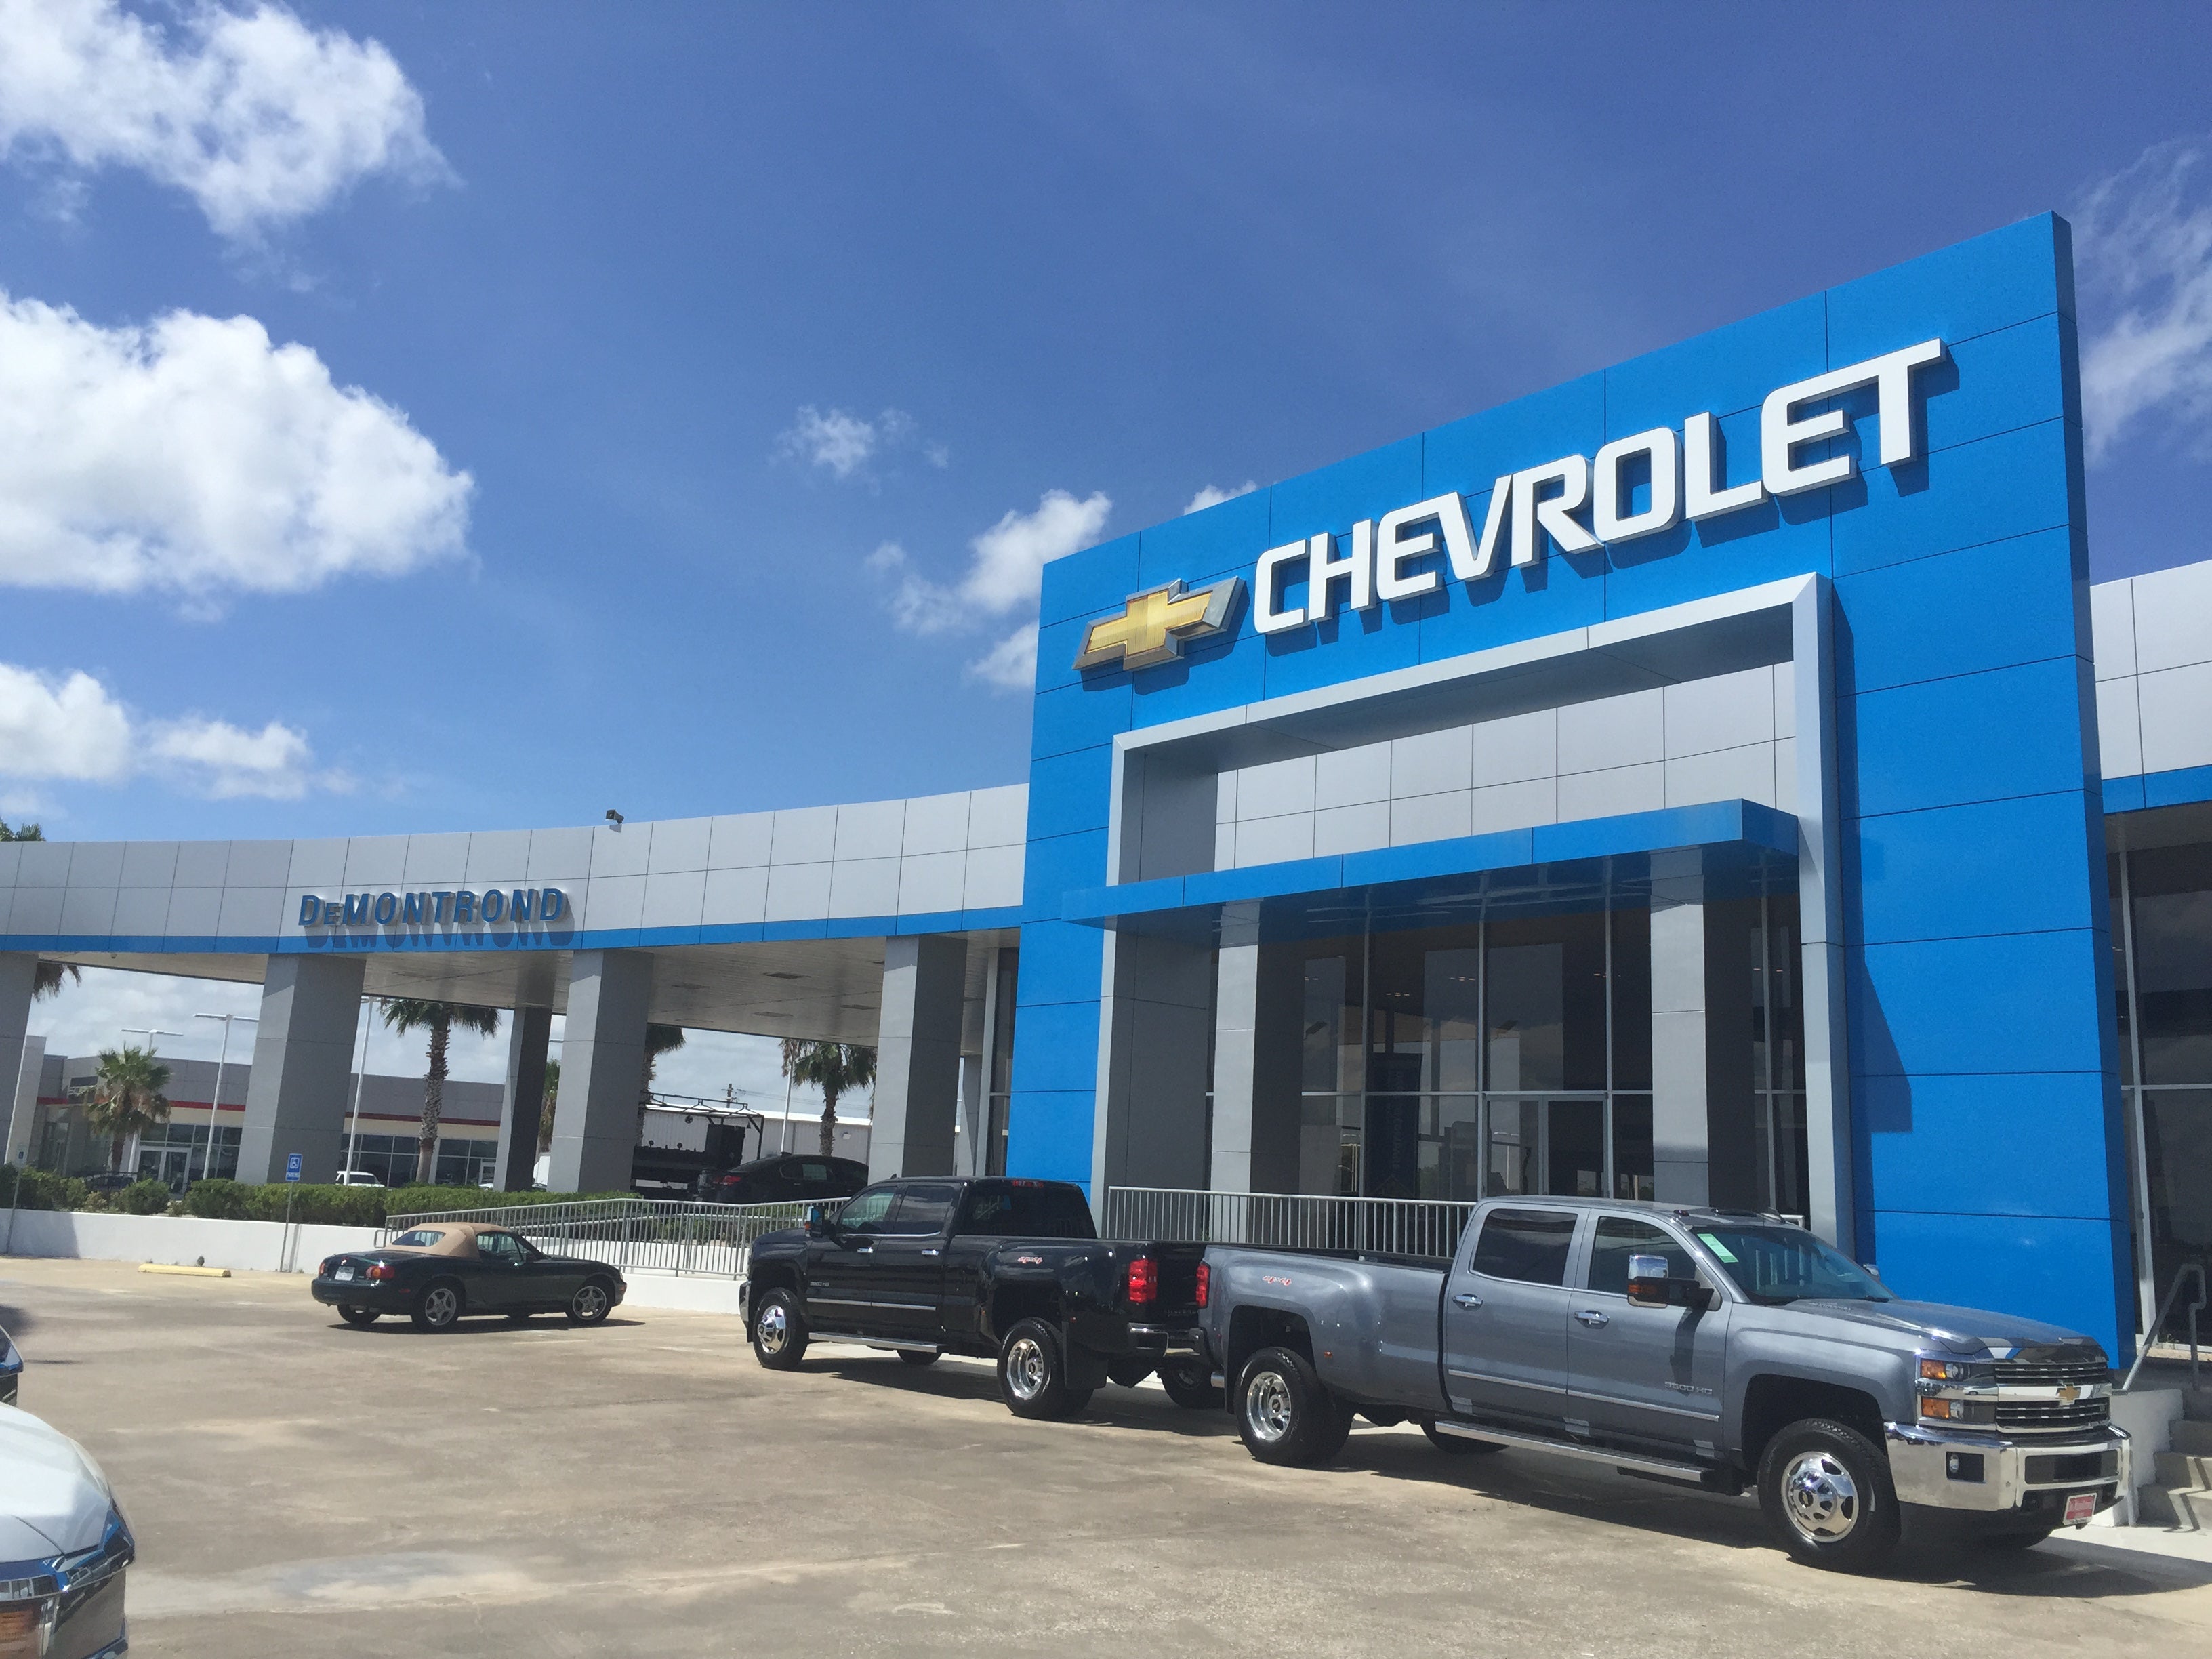 DeMontrond Chevrolet About Us